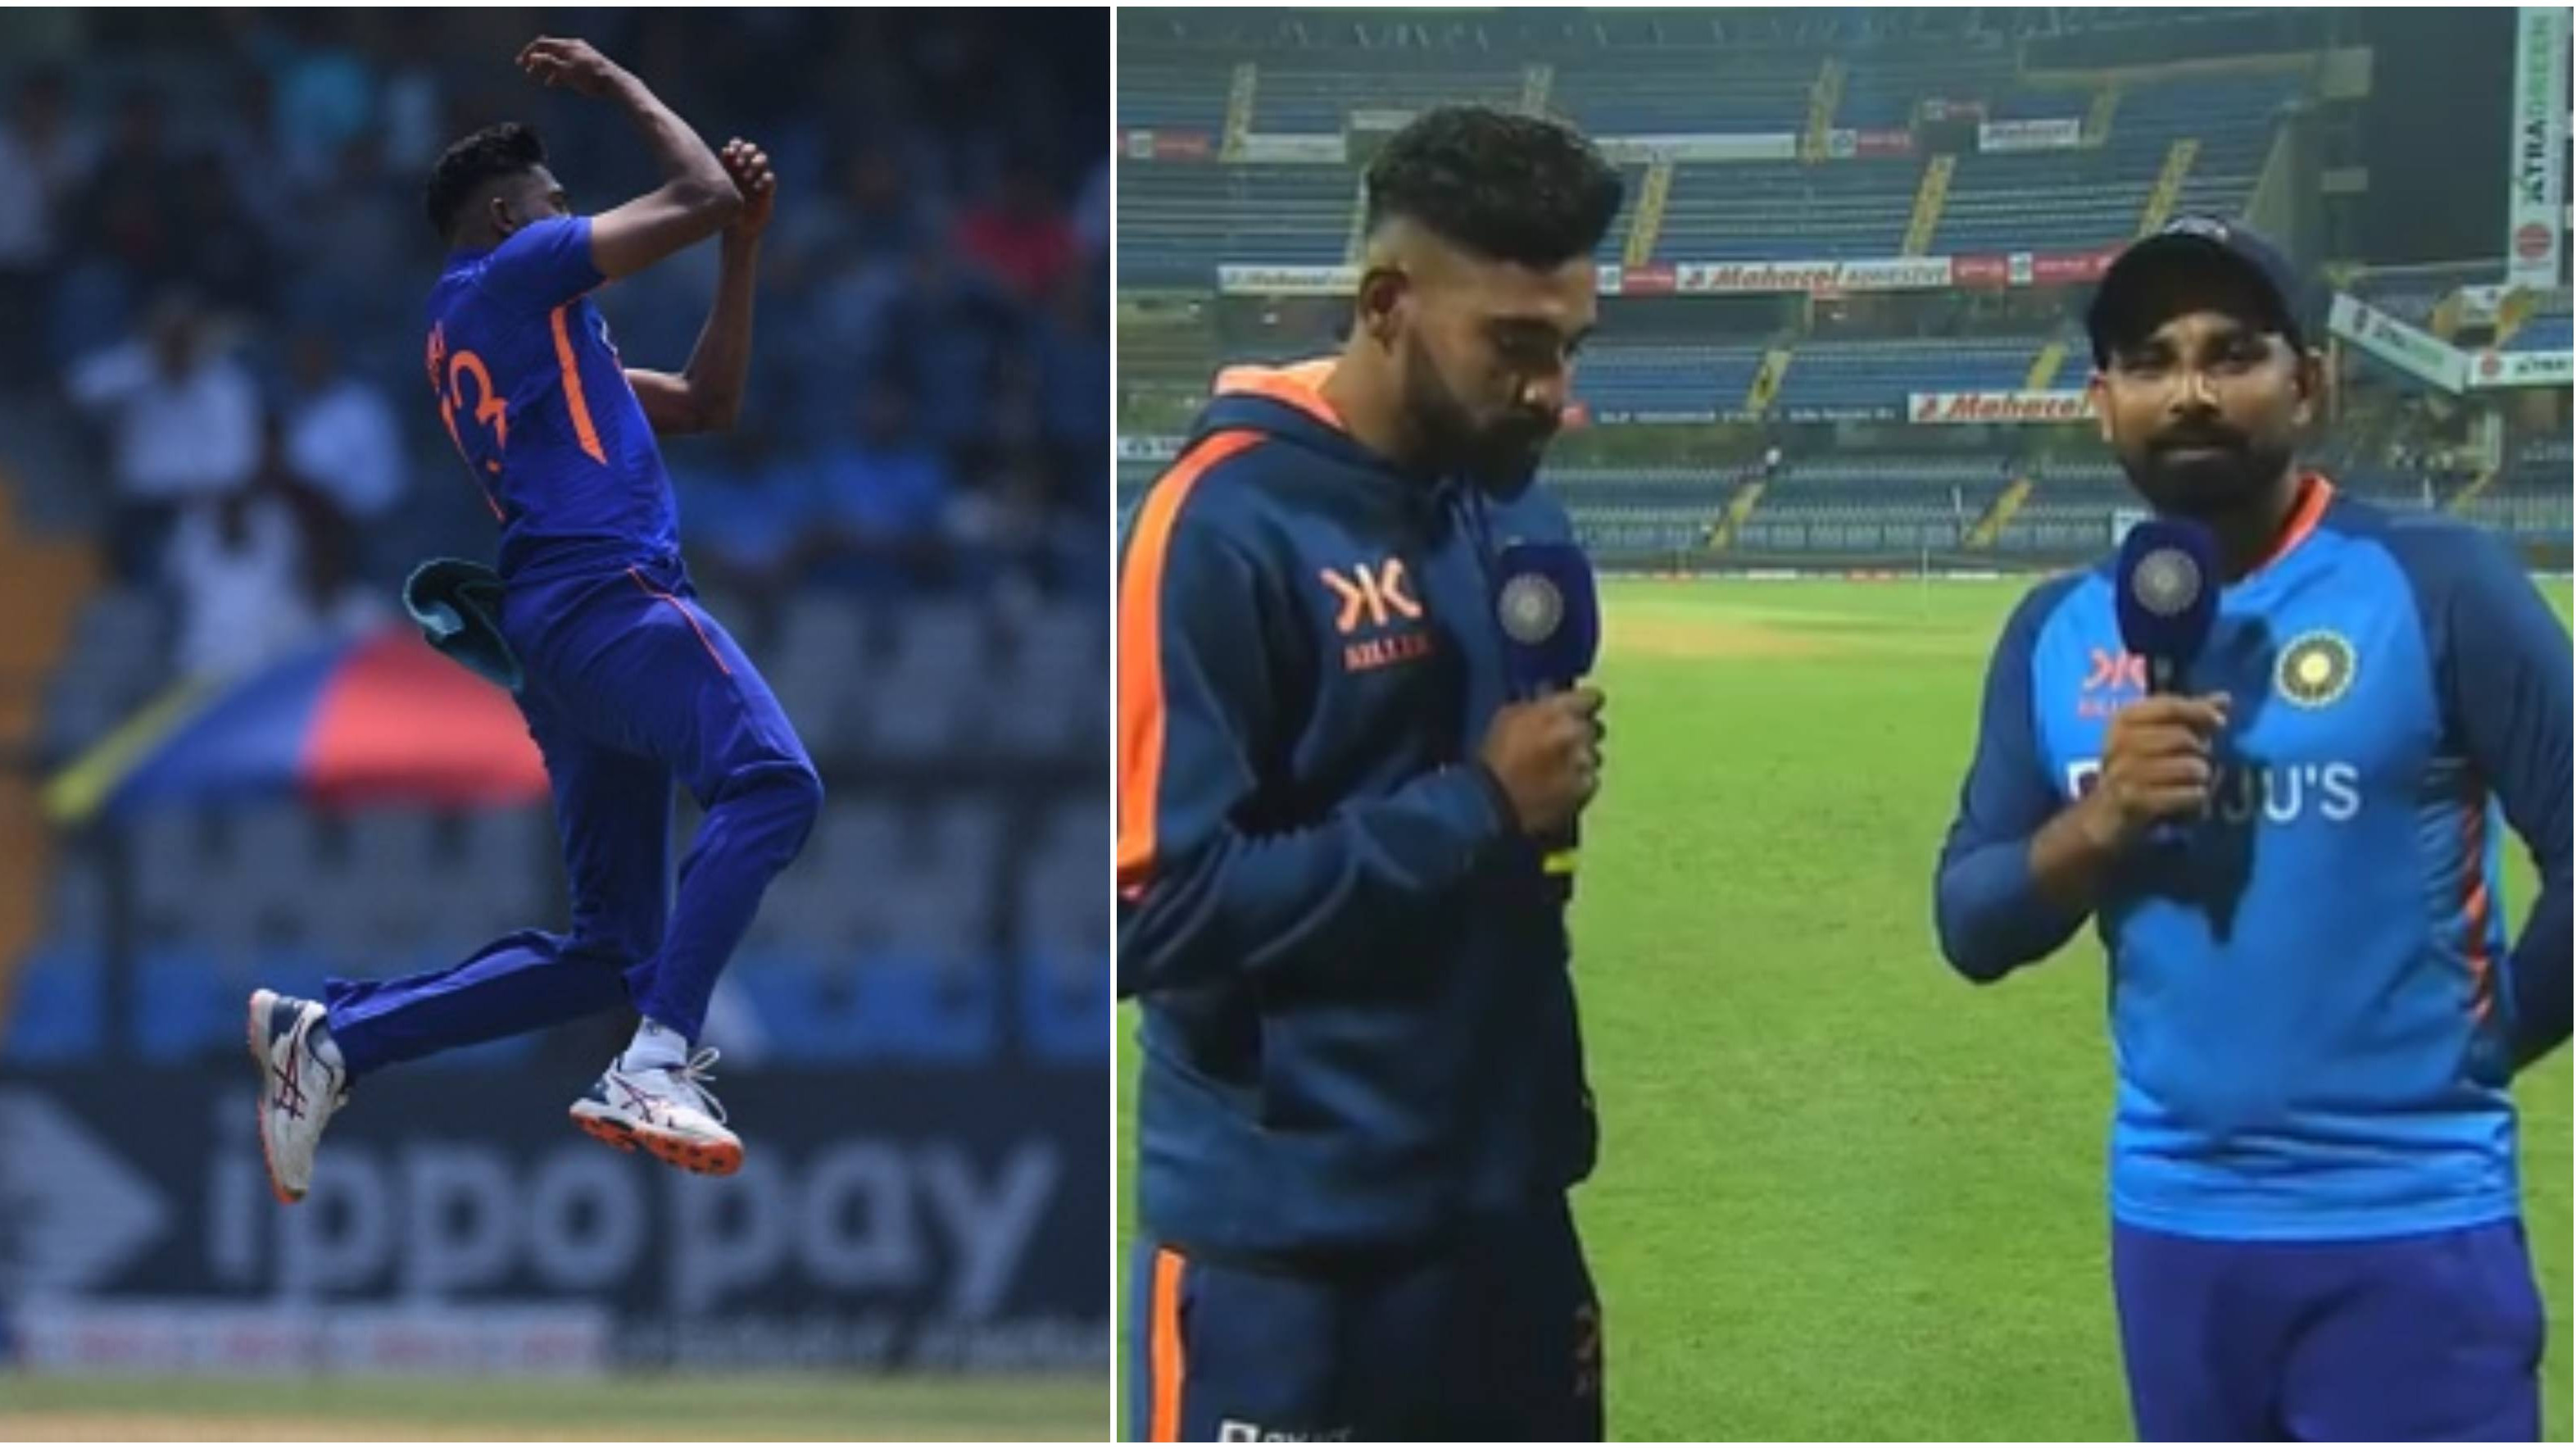 IND v AUS 2023: WATCH – “You should stay away from these jumps,” Shami advices Siraj to not imitate Ronaldo’s celebration